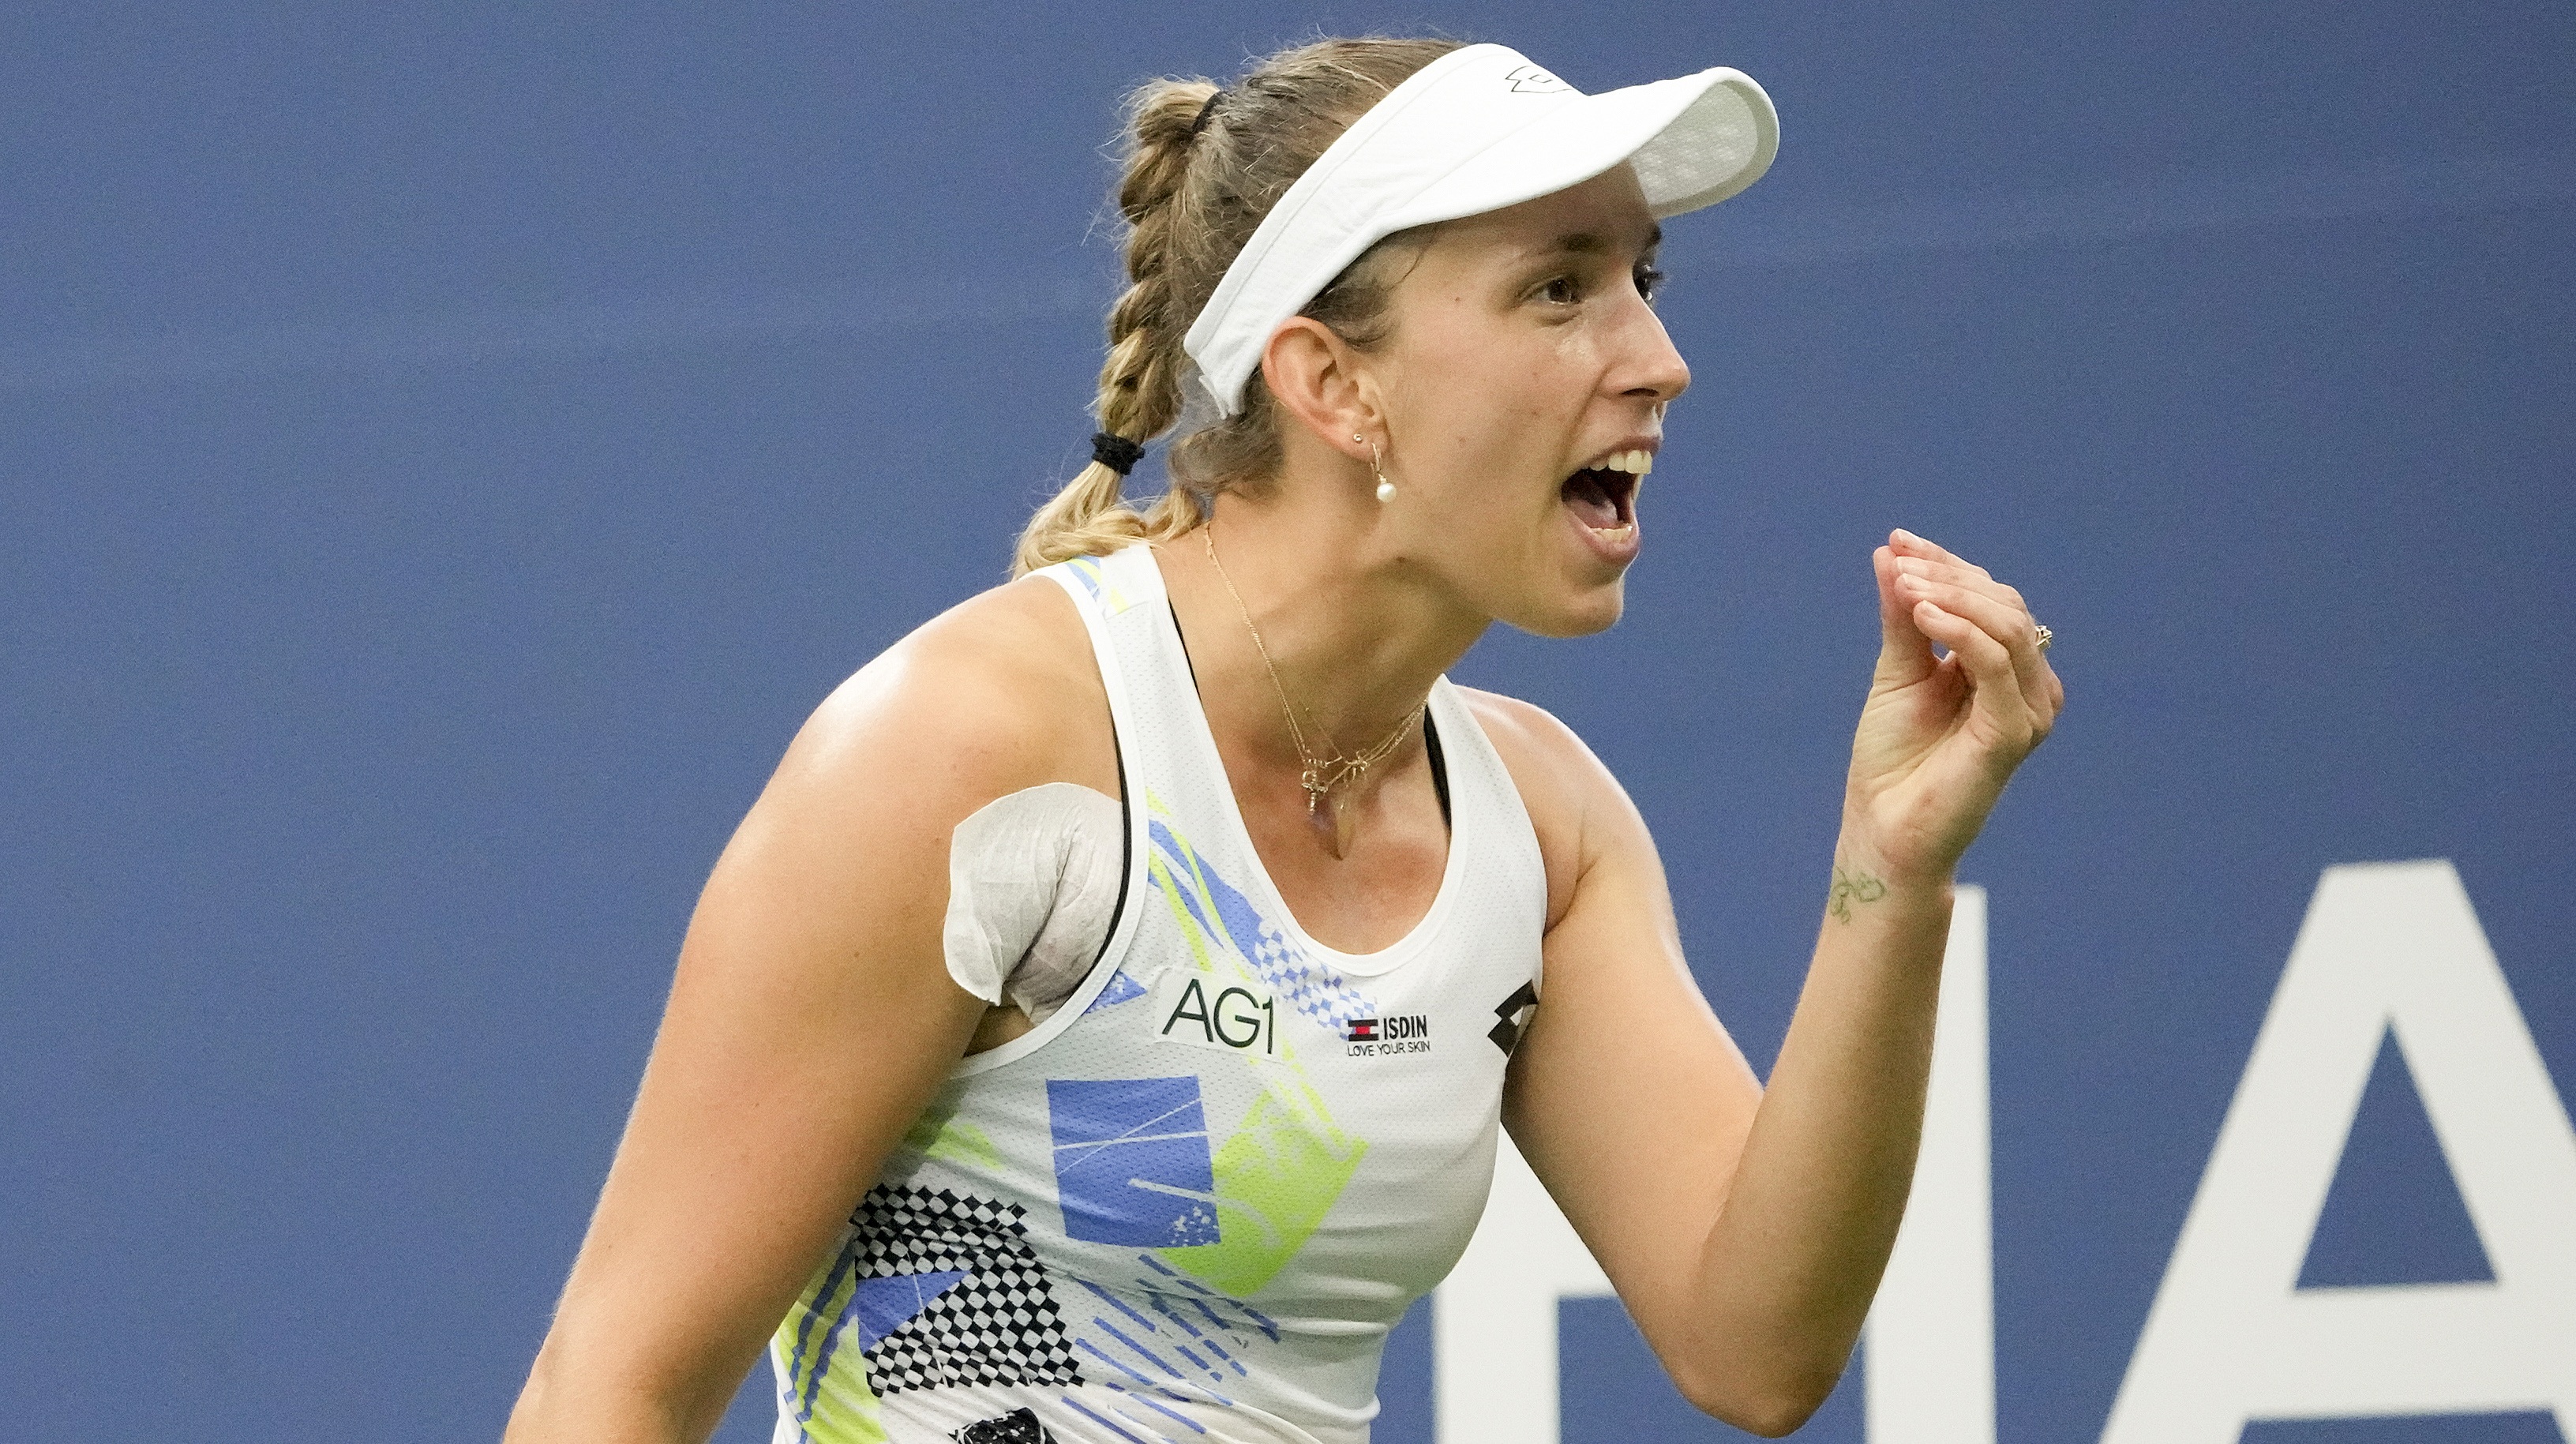 Elise Mertens saves two match points to deny Danielle Collins US Open duel with Coco Gauff